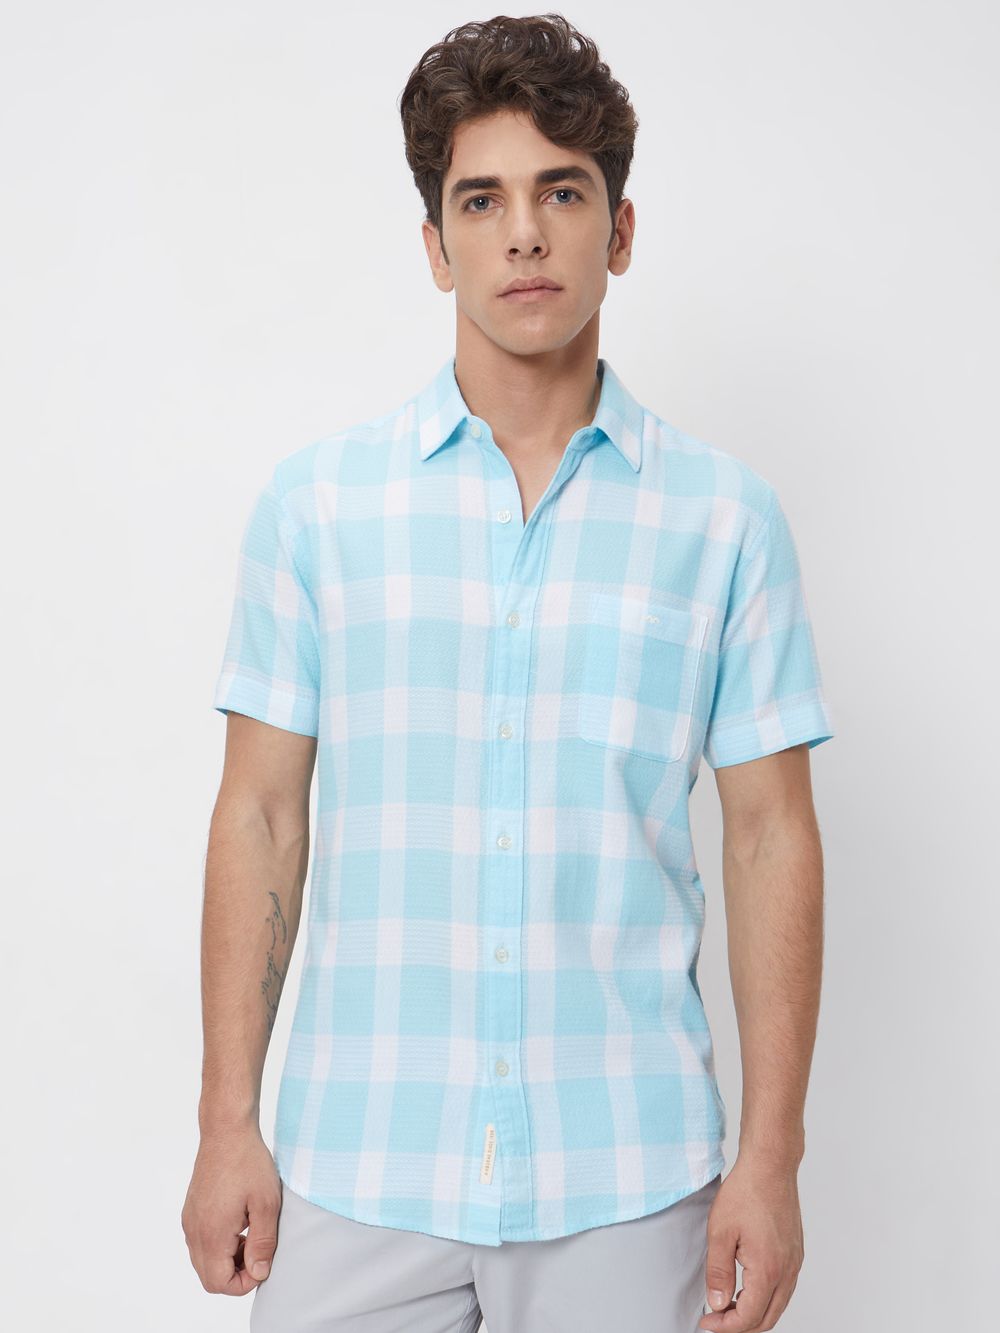 Turquoise & White Textured Check Slim Fit Casual Shirt